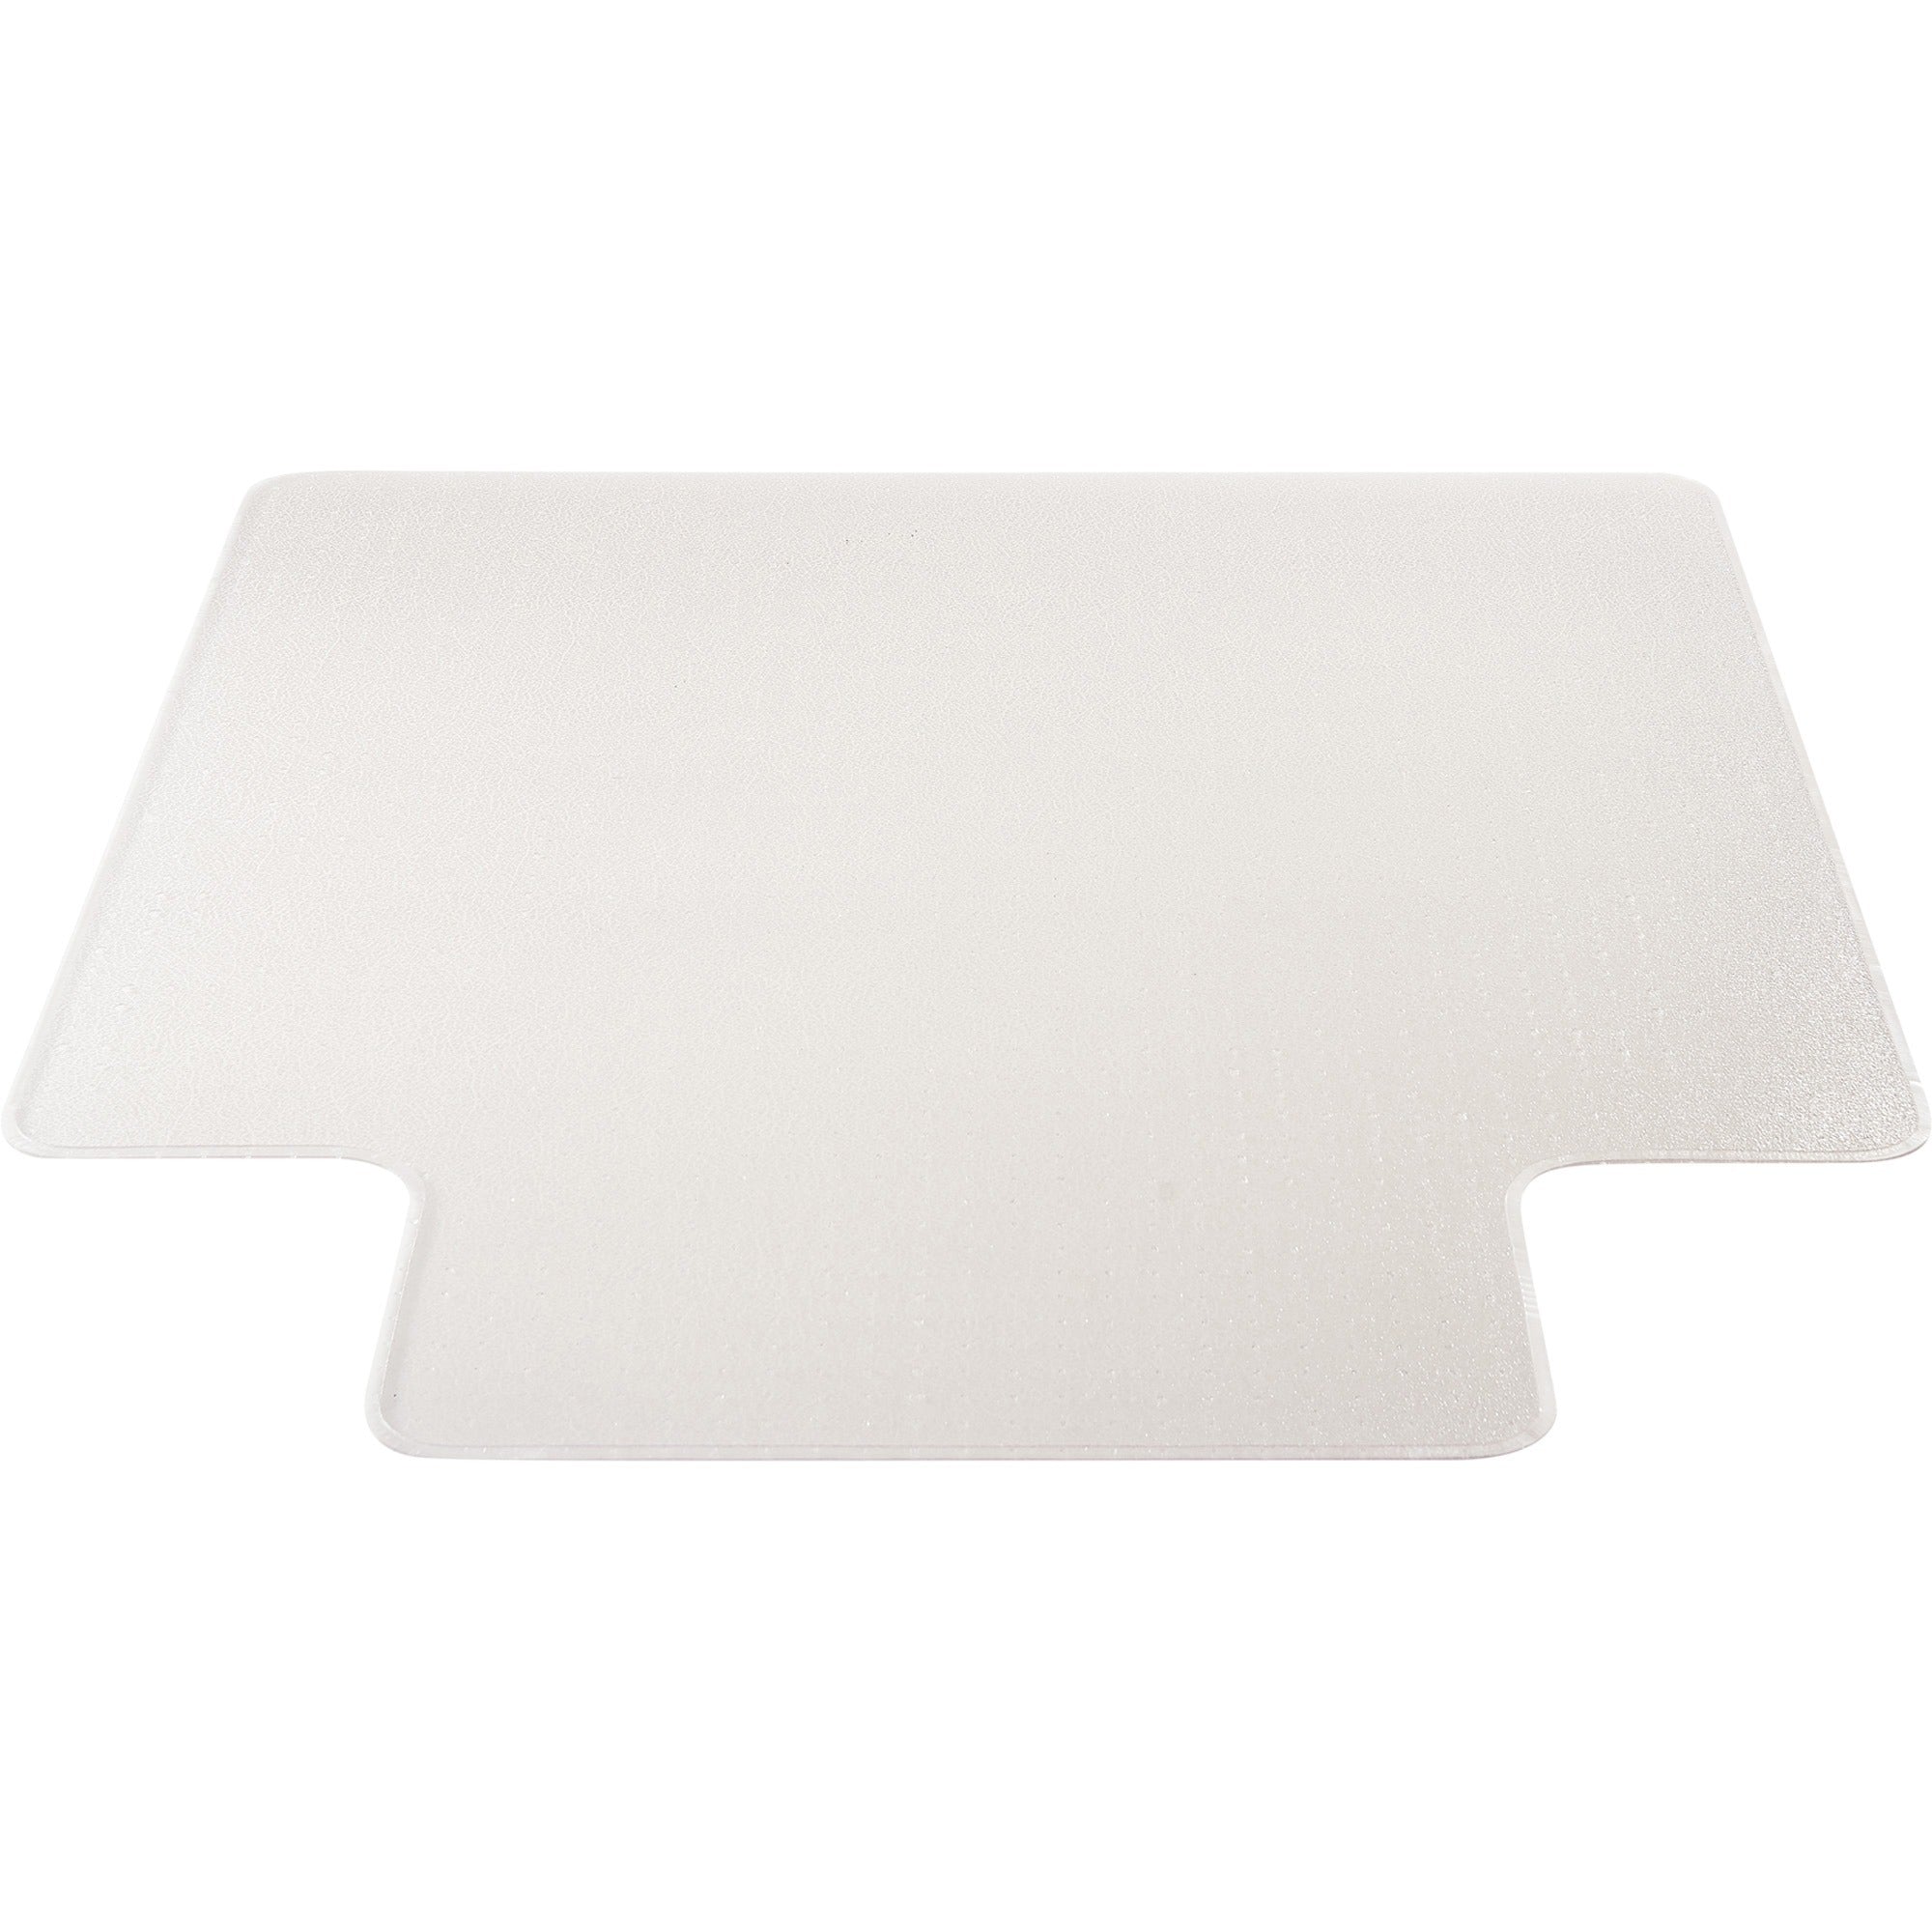 Lorell Plush-pile Wide-Lip Chairmat - Carpeted Floor - 53" Length x 45" Width x 0.173" Thickness - Lip Size 12" Length x 25" Width - Vinyl - Clear - 1Each - 